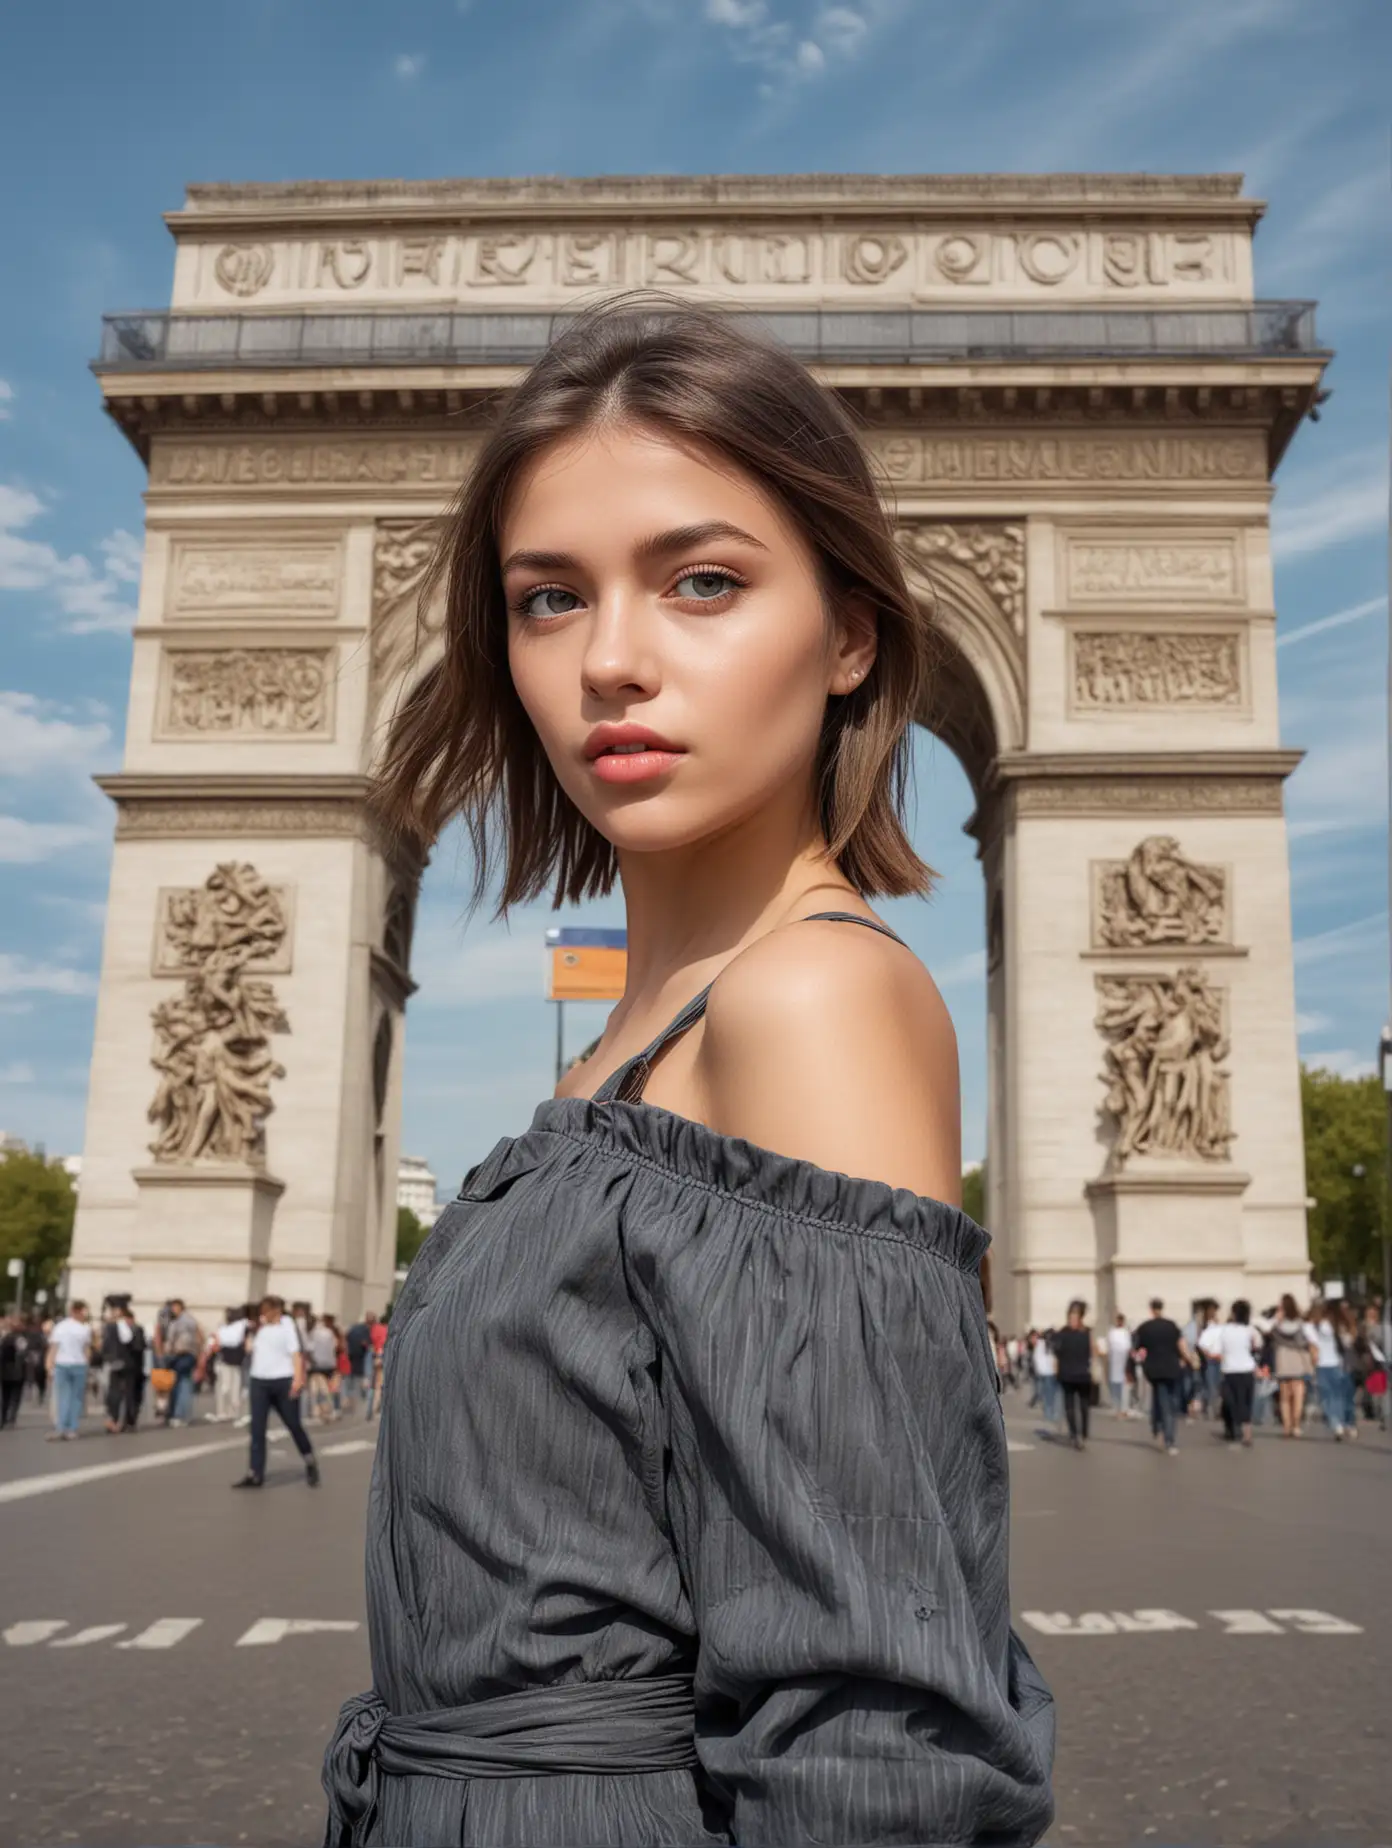 A Ukrainian girl in fashionable and sexy clothes, with exquisite facial features, facing the camera, in front of the Arc de Triomphe, professional photography technology